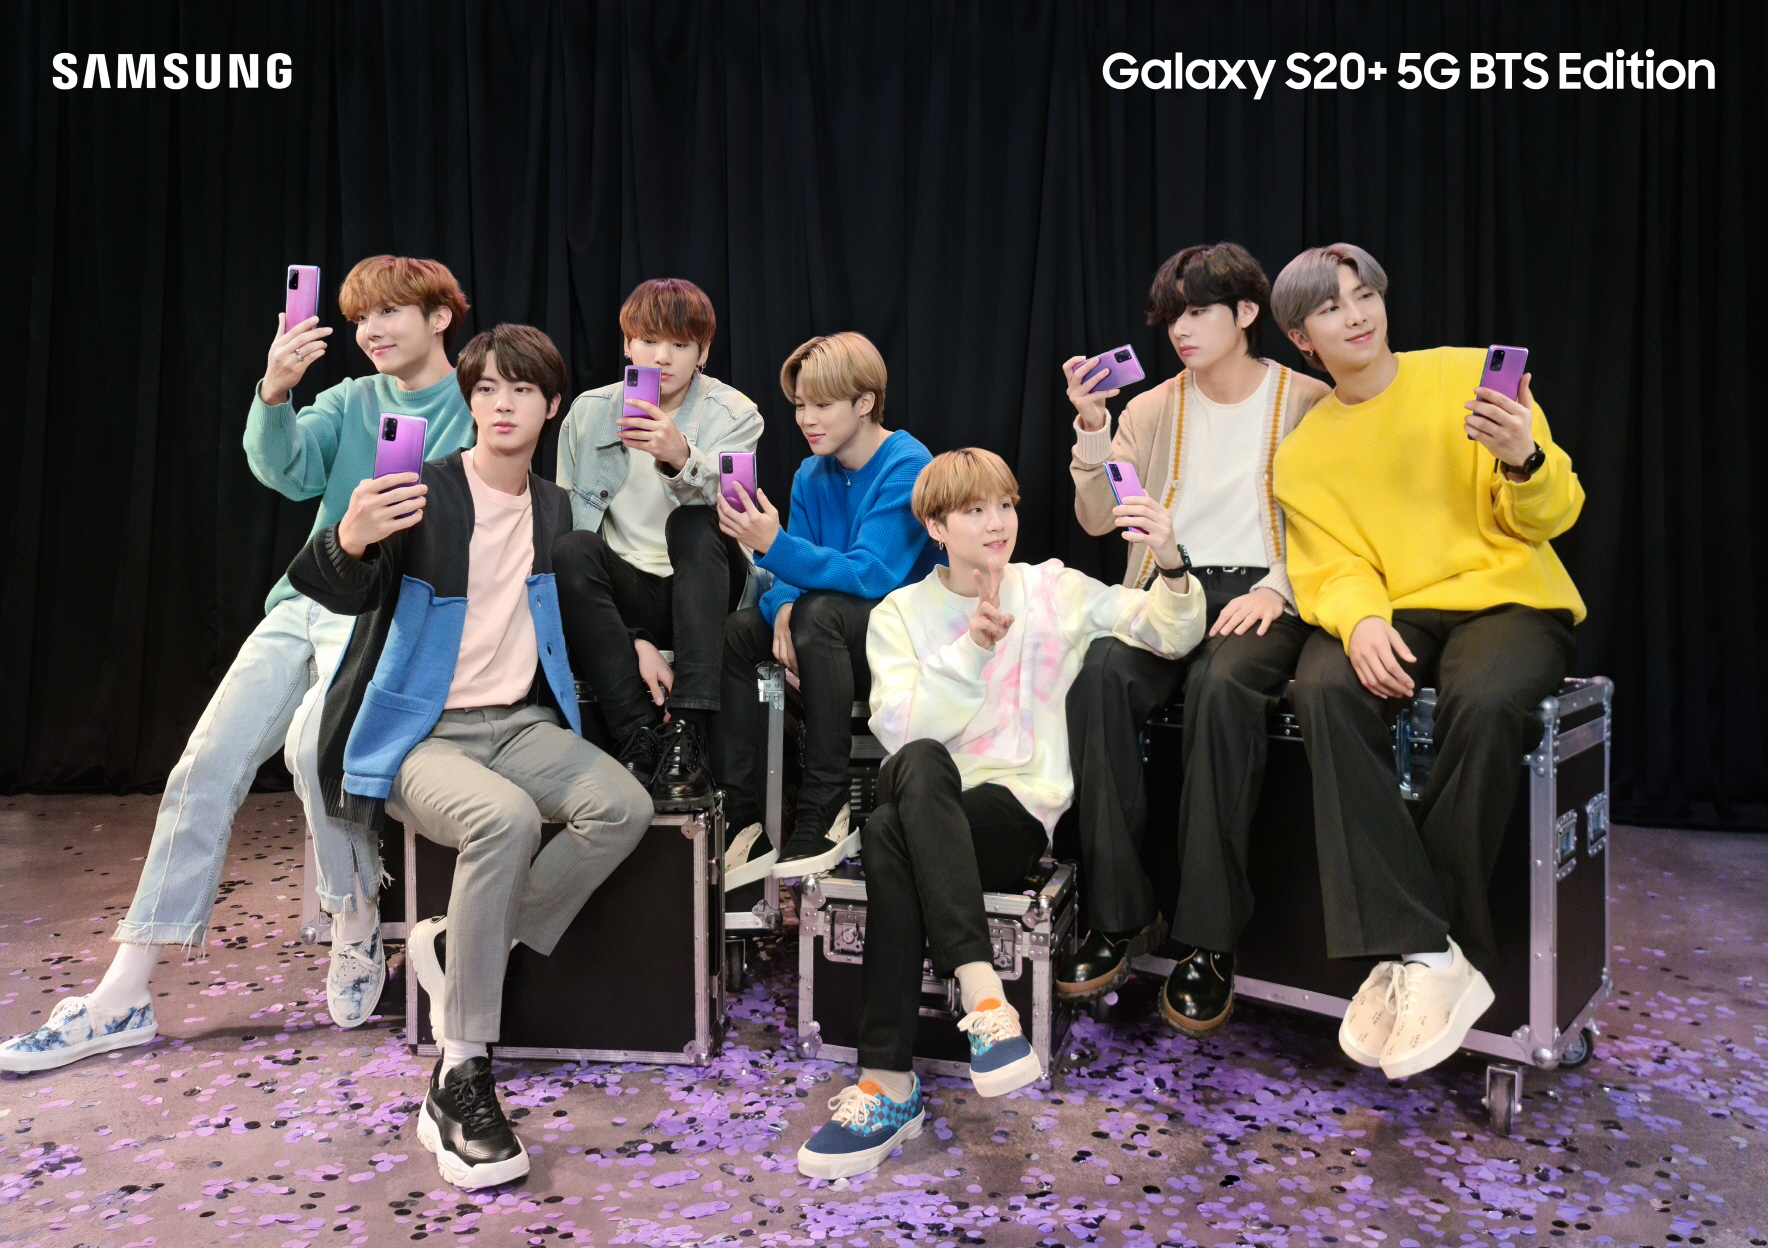 BTS fans are getting special Samsung Galaxy S20+, Galaxy